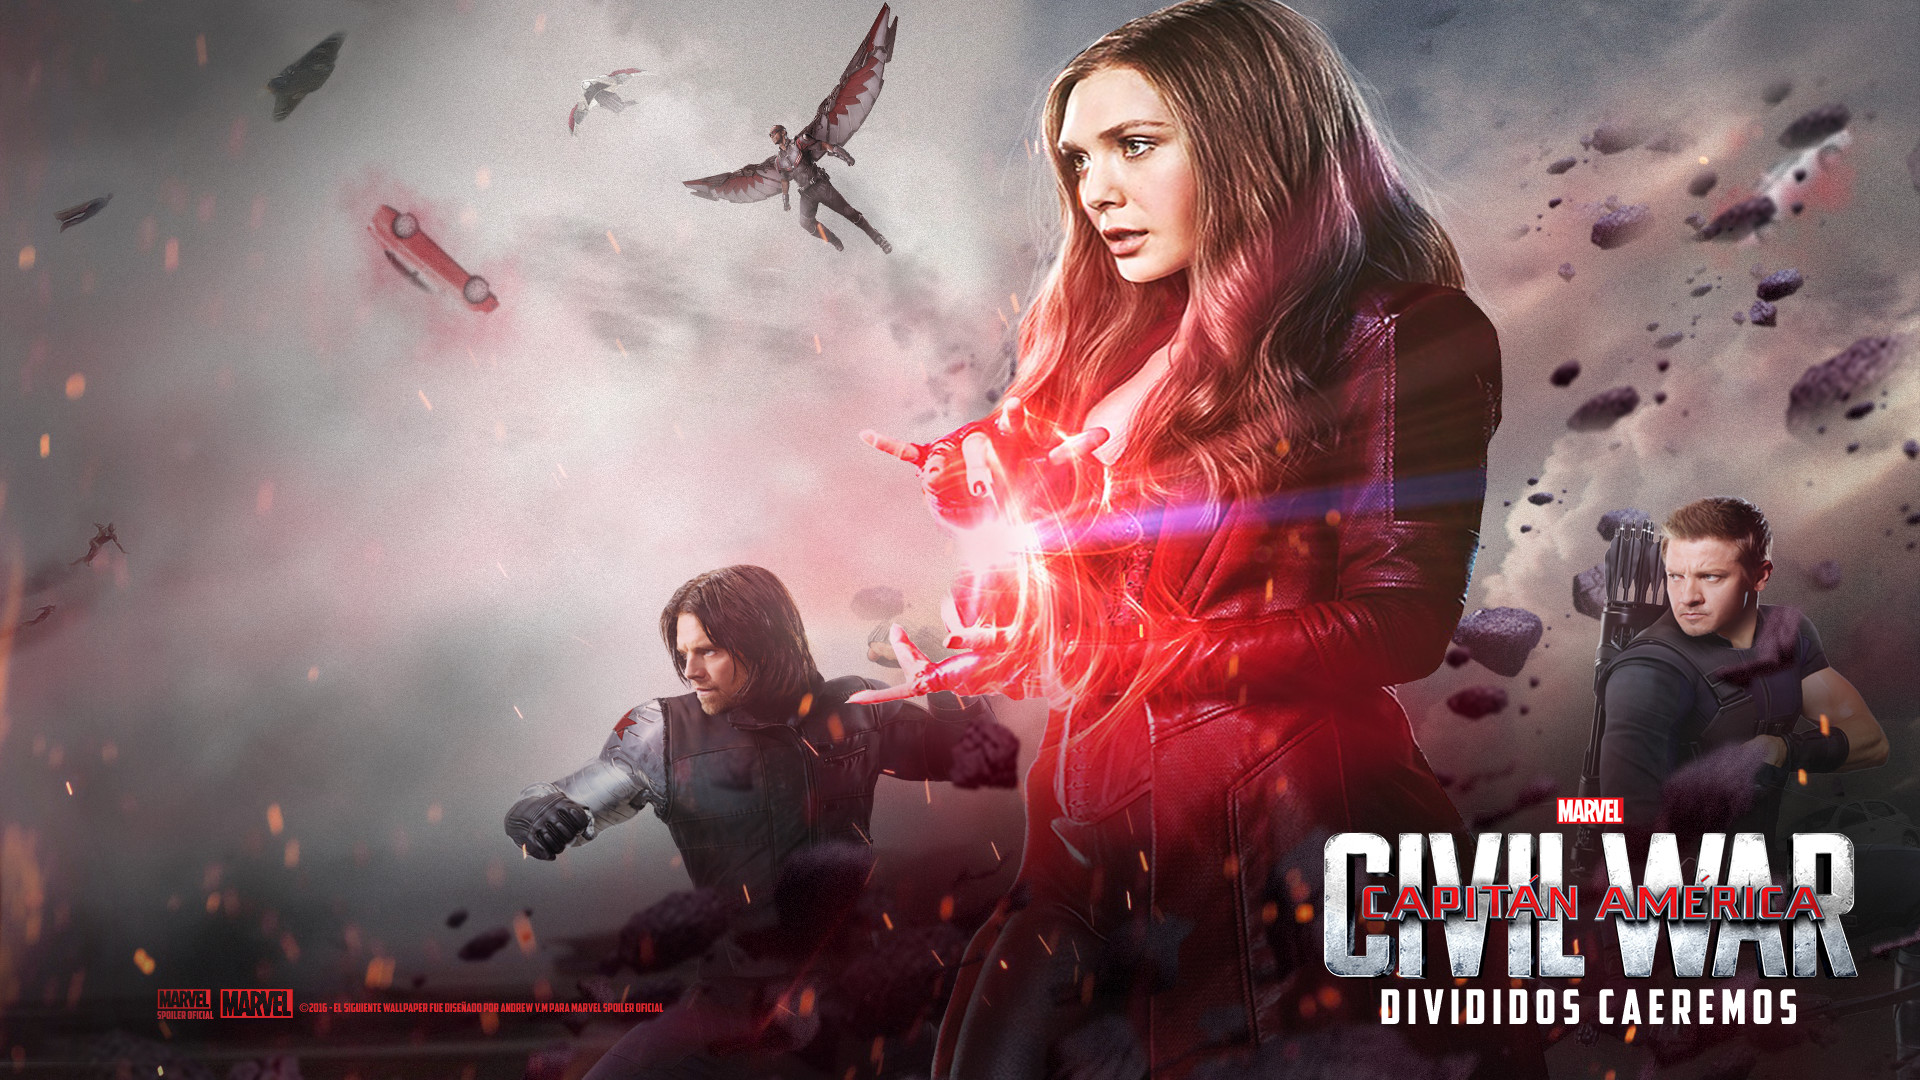 1920x1080 0 AvengersCaptain America images Captain America Civil War HD Capitan  America CIVIL WAR (Scarlet Witch) HD Wallp by Andrewvm on